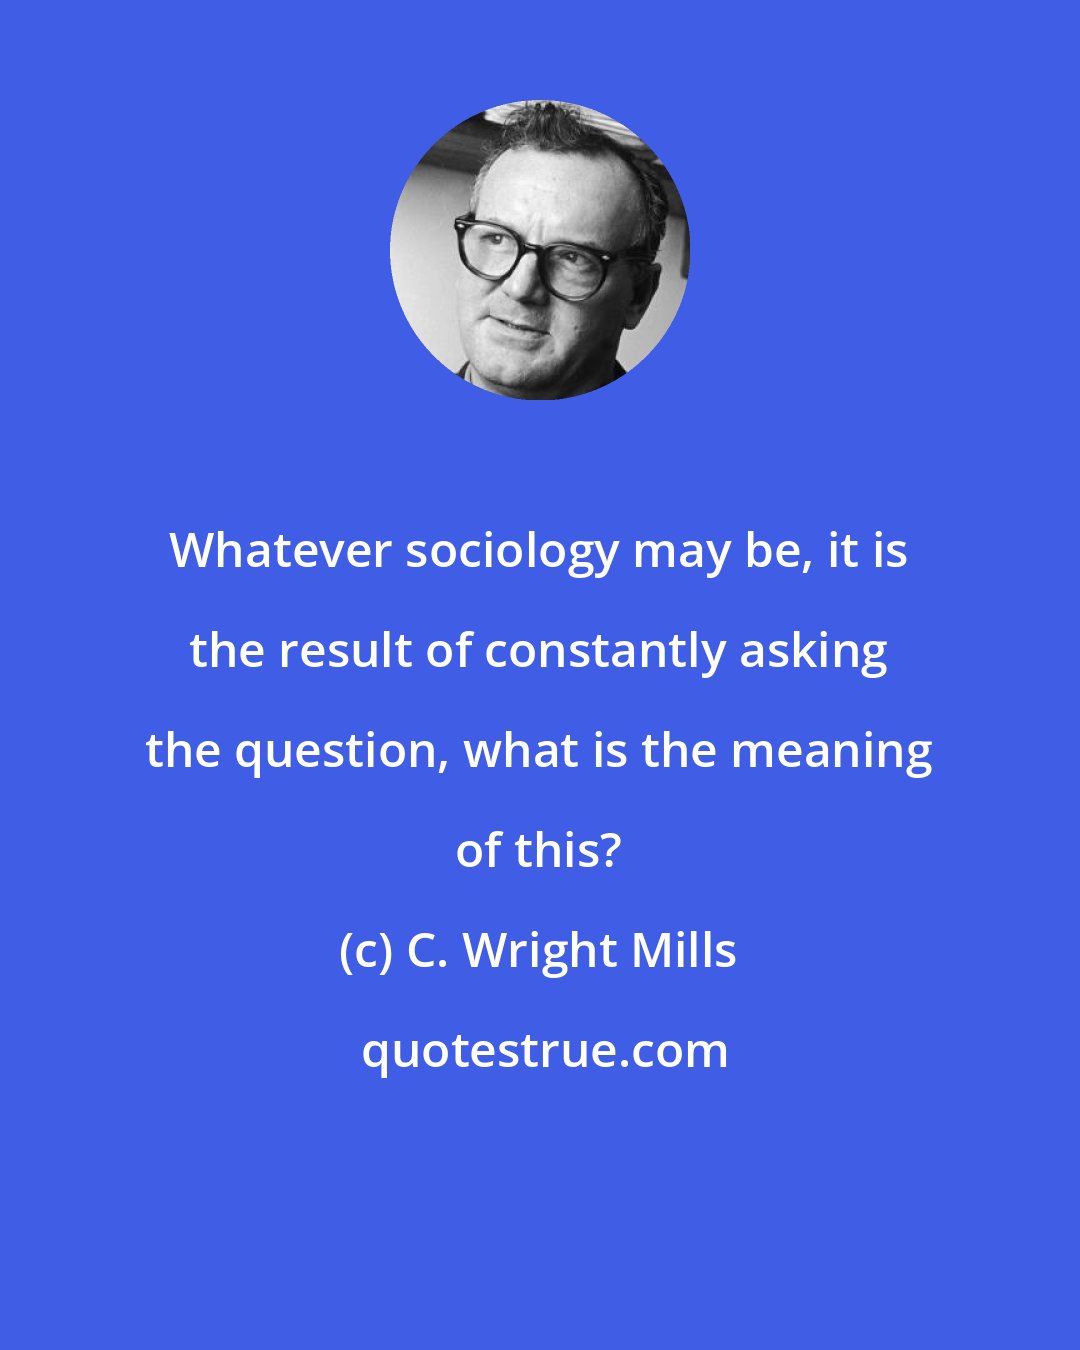 C. Wright Mills: Whatever sociology may be, it is the result of constantly asking the question, what is the meaning of this?